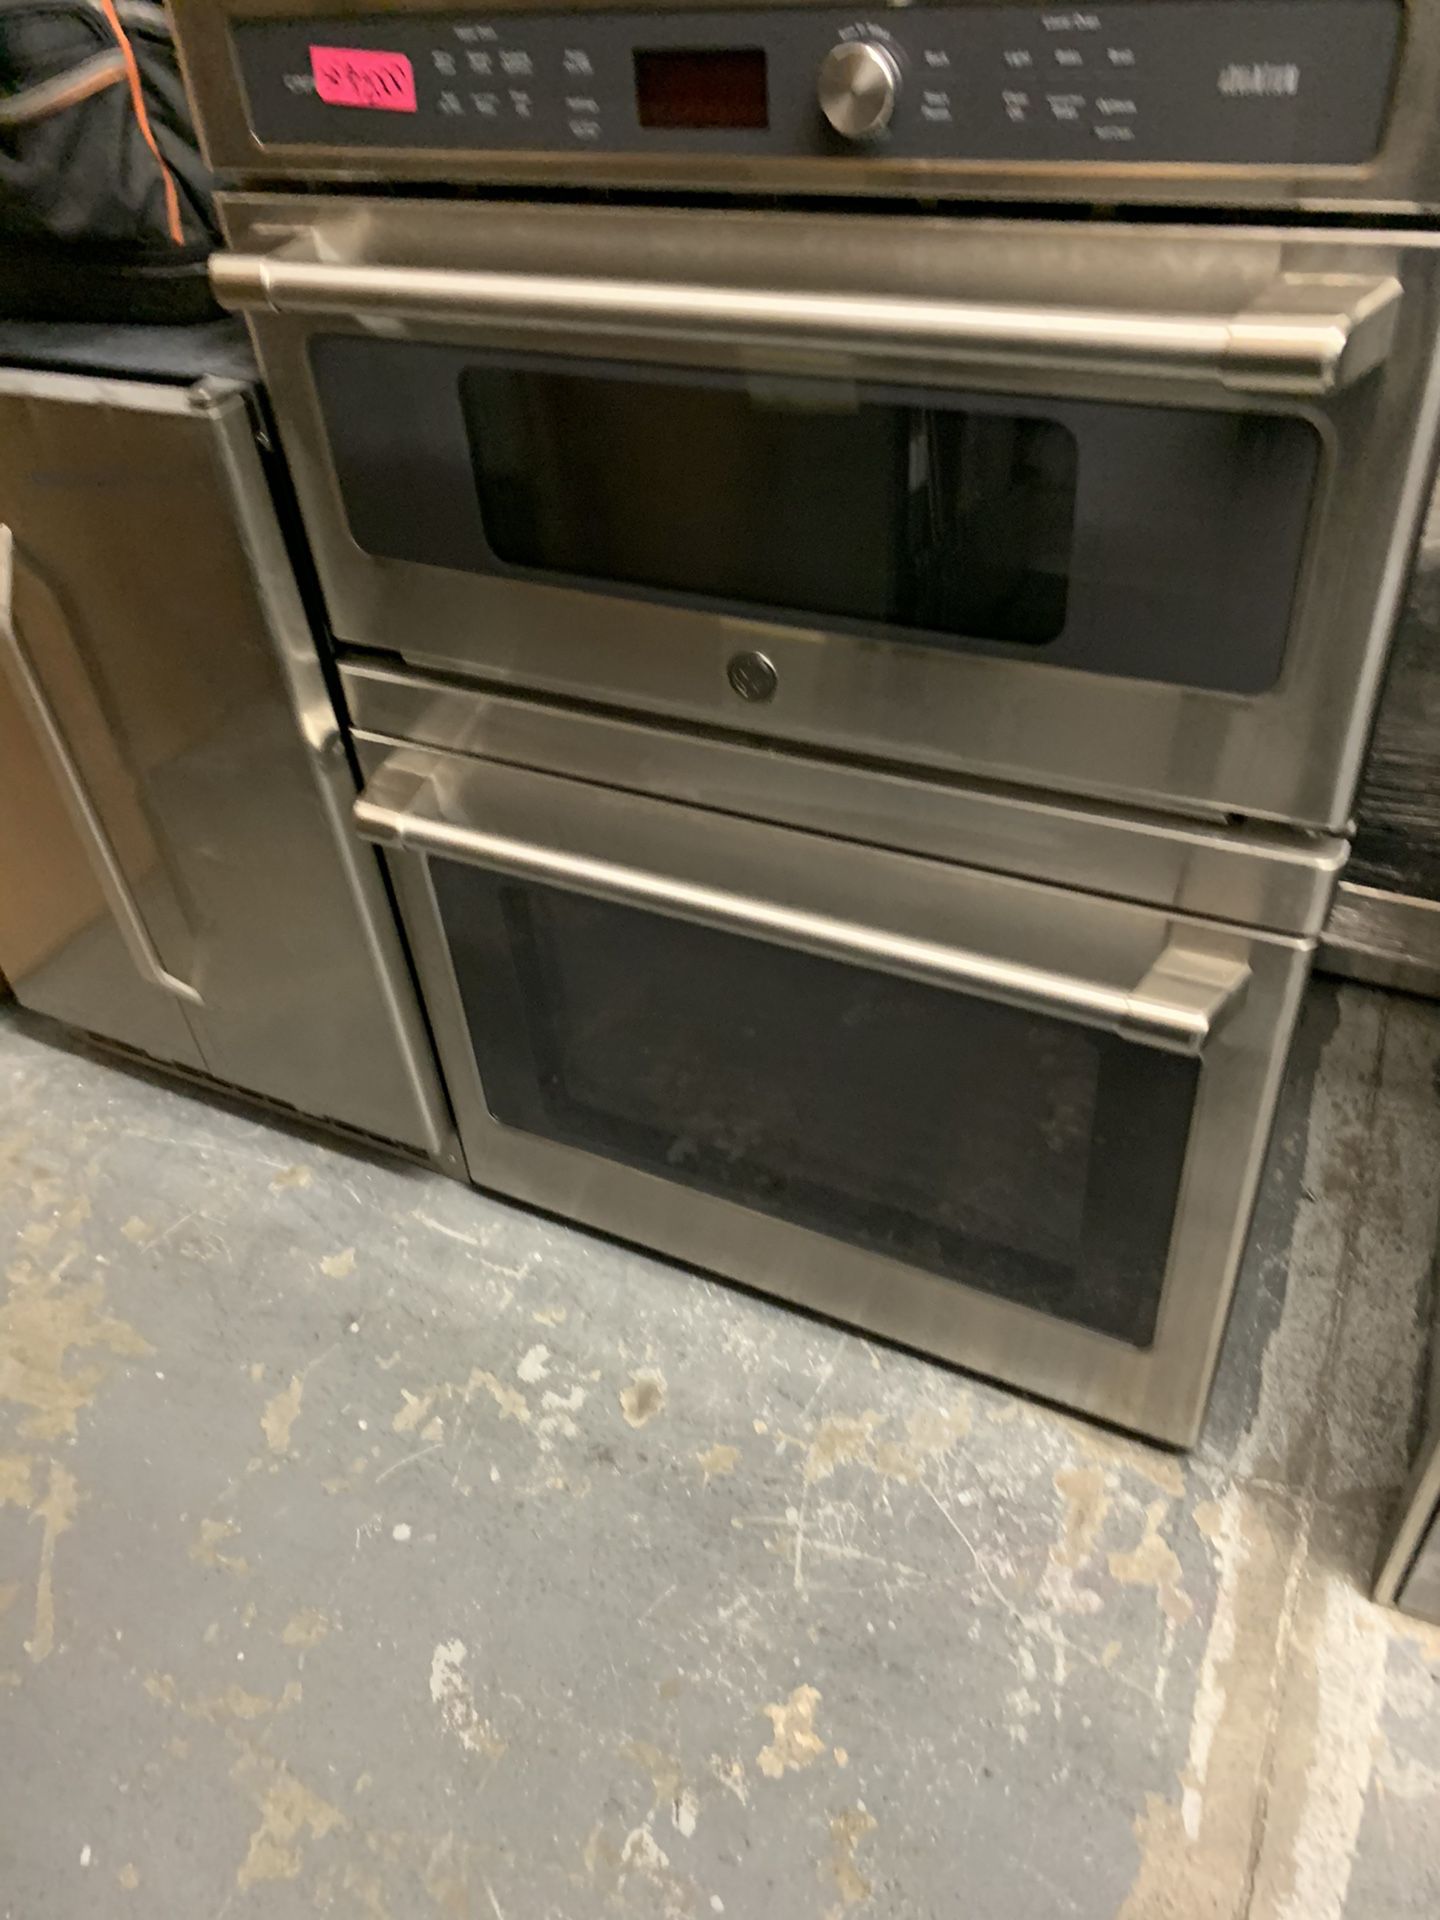 Ge profile 30” microwave oven combo